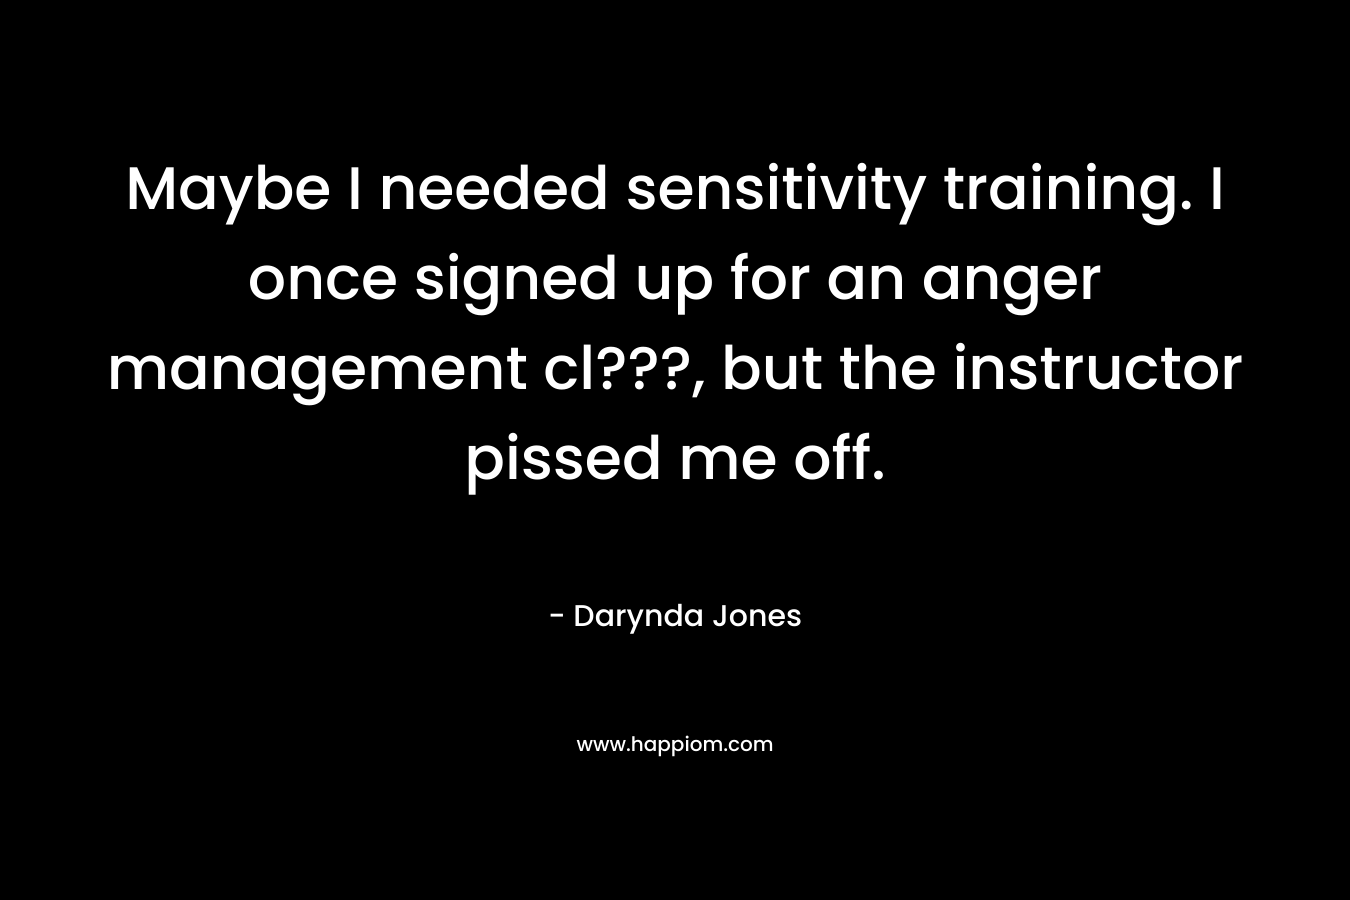 Maybe I needed sensitivity training. I once signed up for an anger management cl???, but the instructor pissed me off. – Darynda Jones